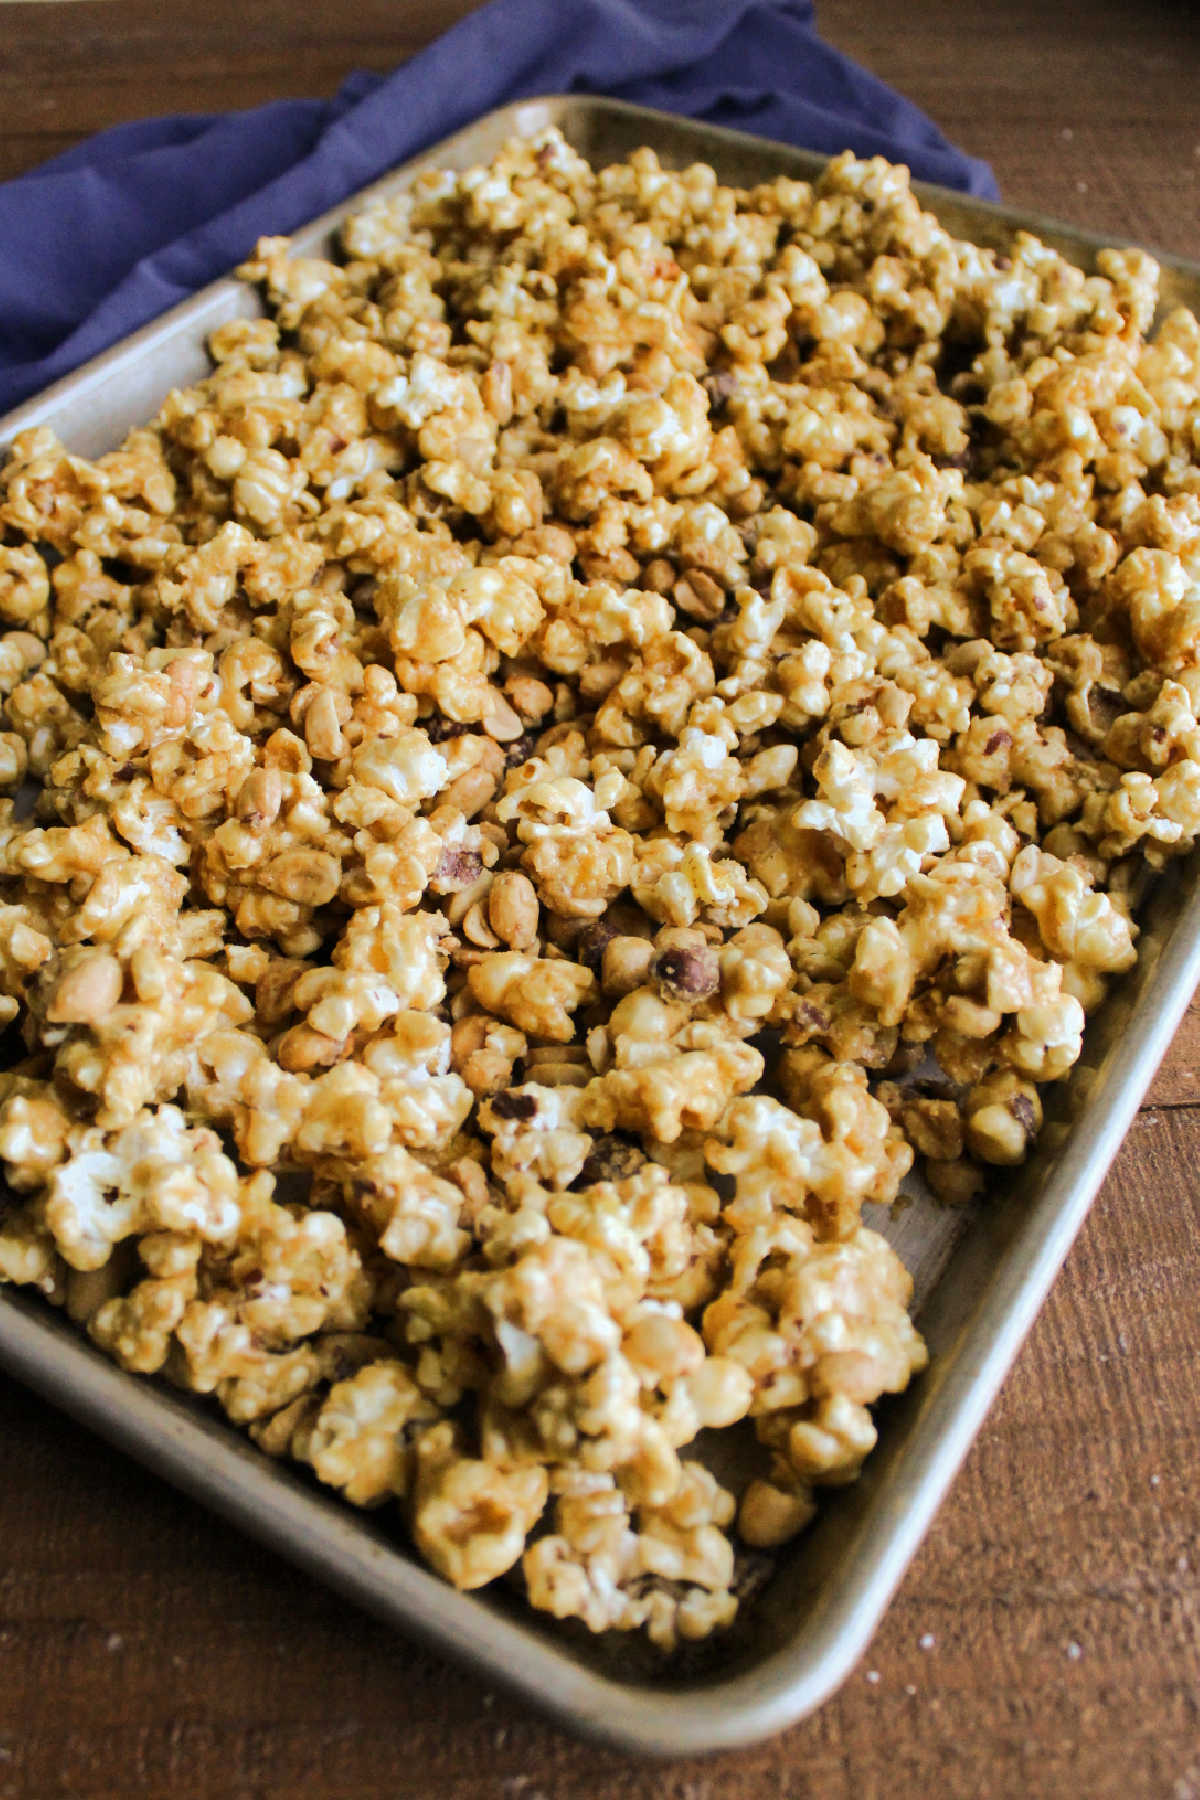 Sheet pan filled with baked caramel corn fresh from the oven, showing crispy texture of caramel.